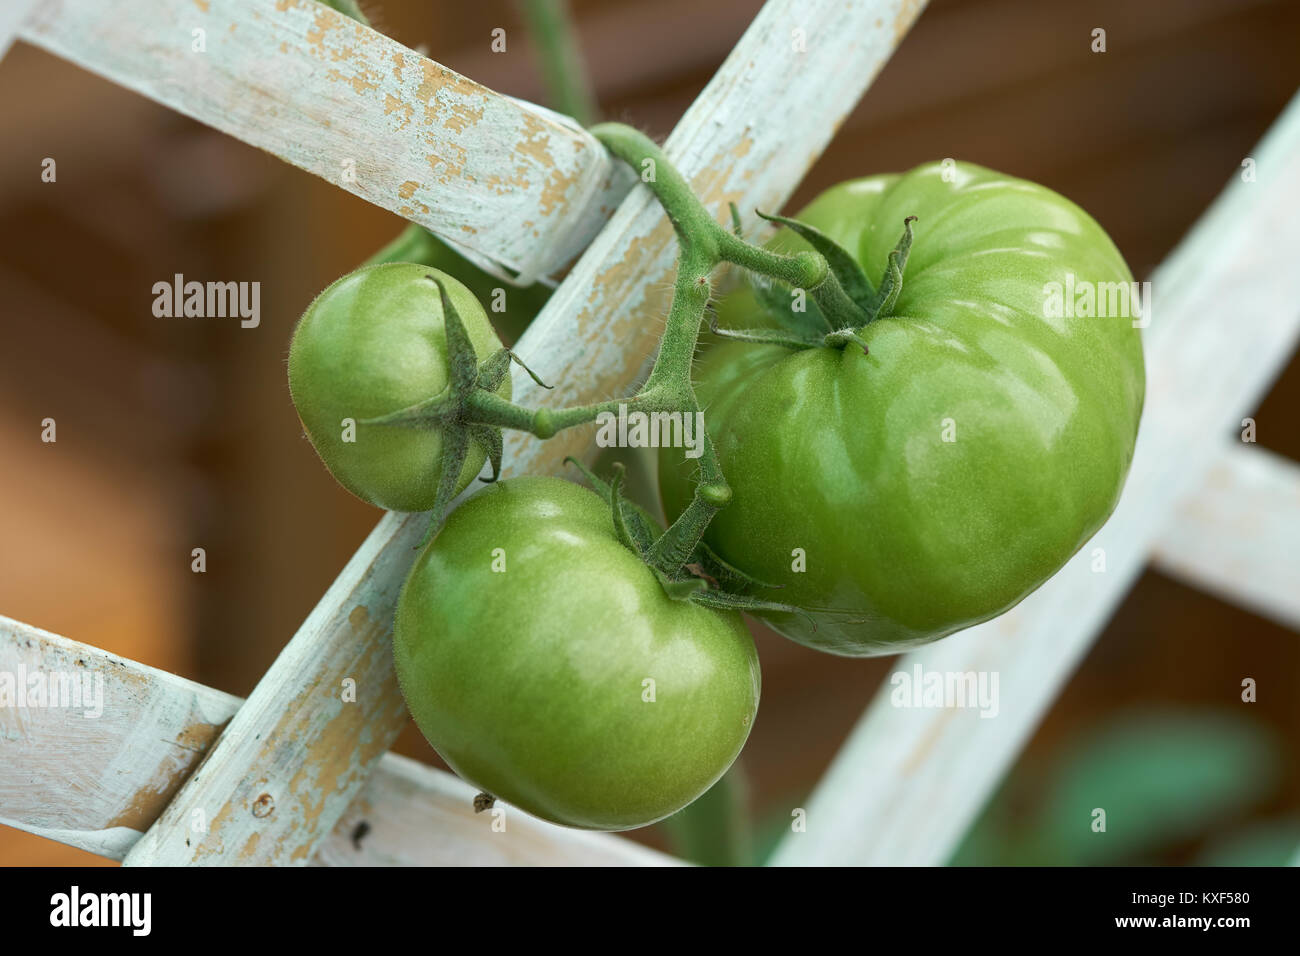 Green tomatoes (Lycopersicon esculentum Mill.) Tomatoes help to nourish the skin, bright, not dry, anti-oxidants that help reduce and slow down the ag Stock Photo